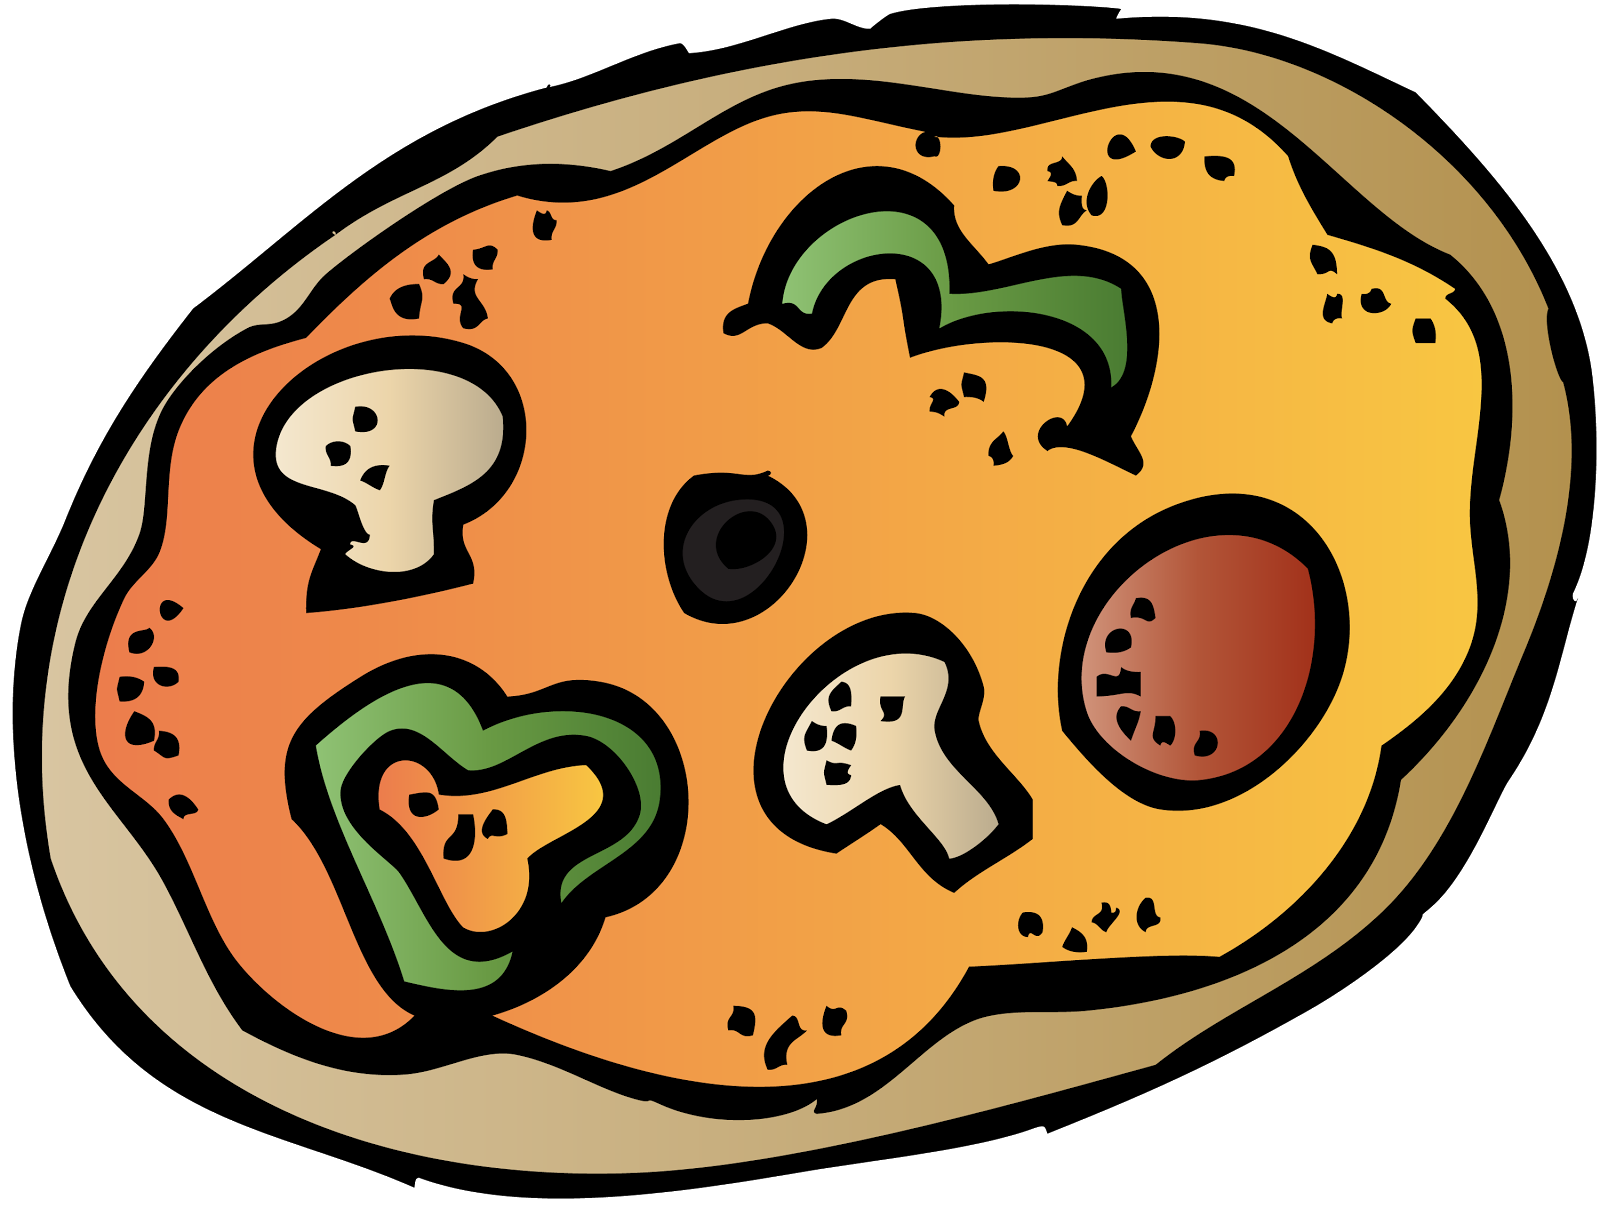 Pizza clipart heart, Pizza heart Transparent FREE for